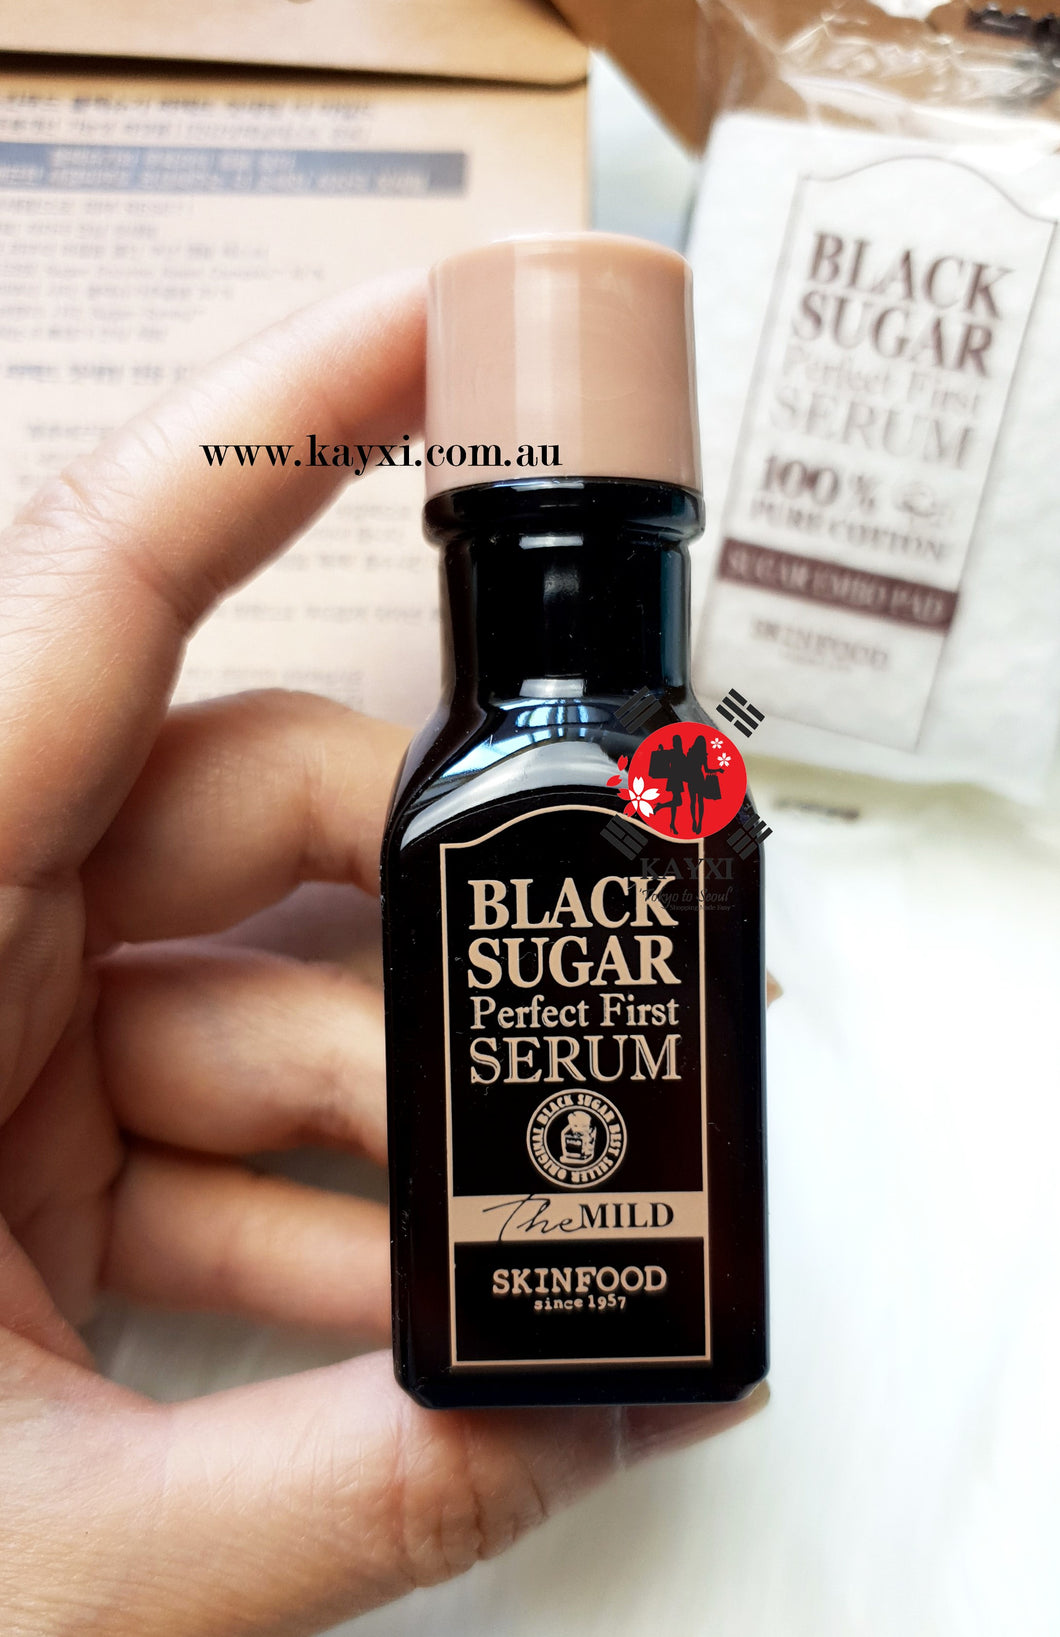 [SKINFOOD] Black Sugar Perfect First Serum Travel Size  15ml + 6 Pcs Double Sided Cotton Pads (65% OFF)